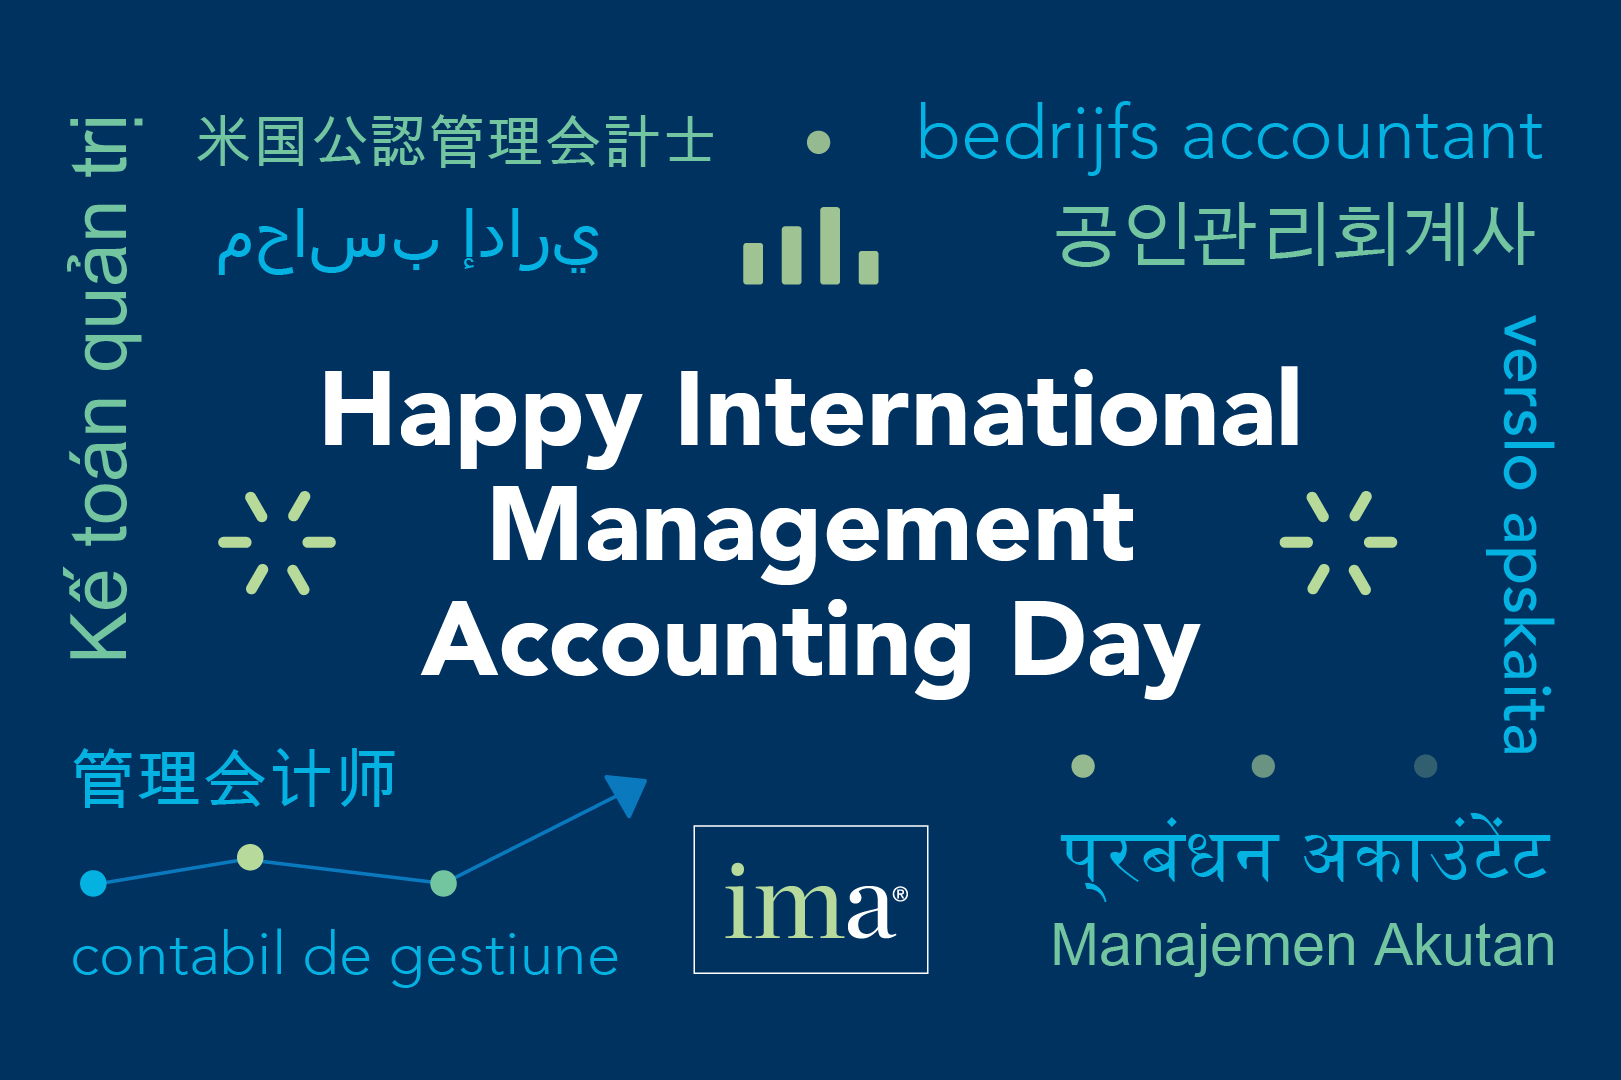 Happy International Management Accounting Day